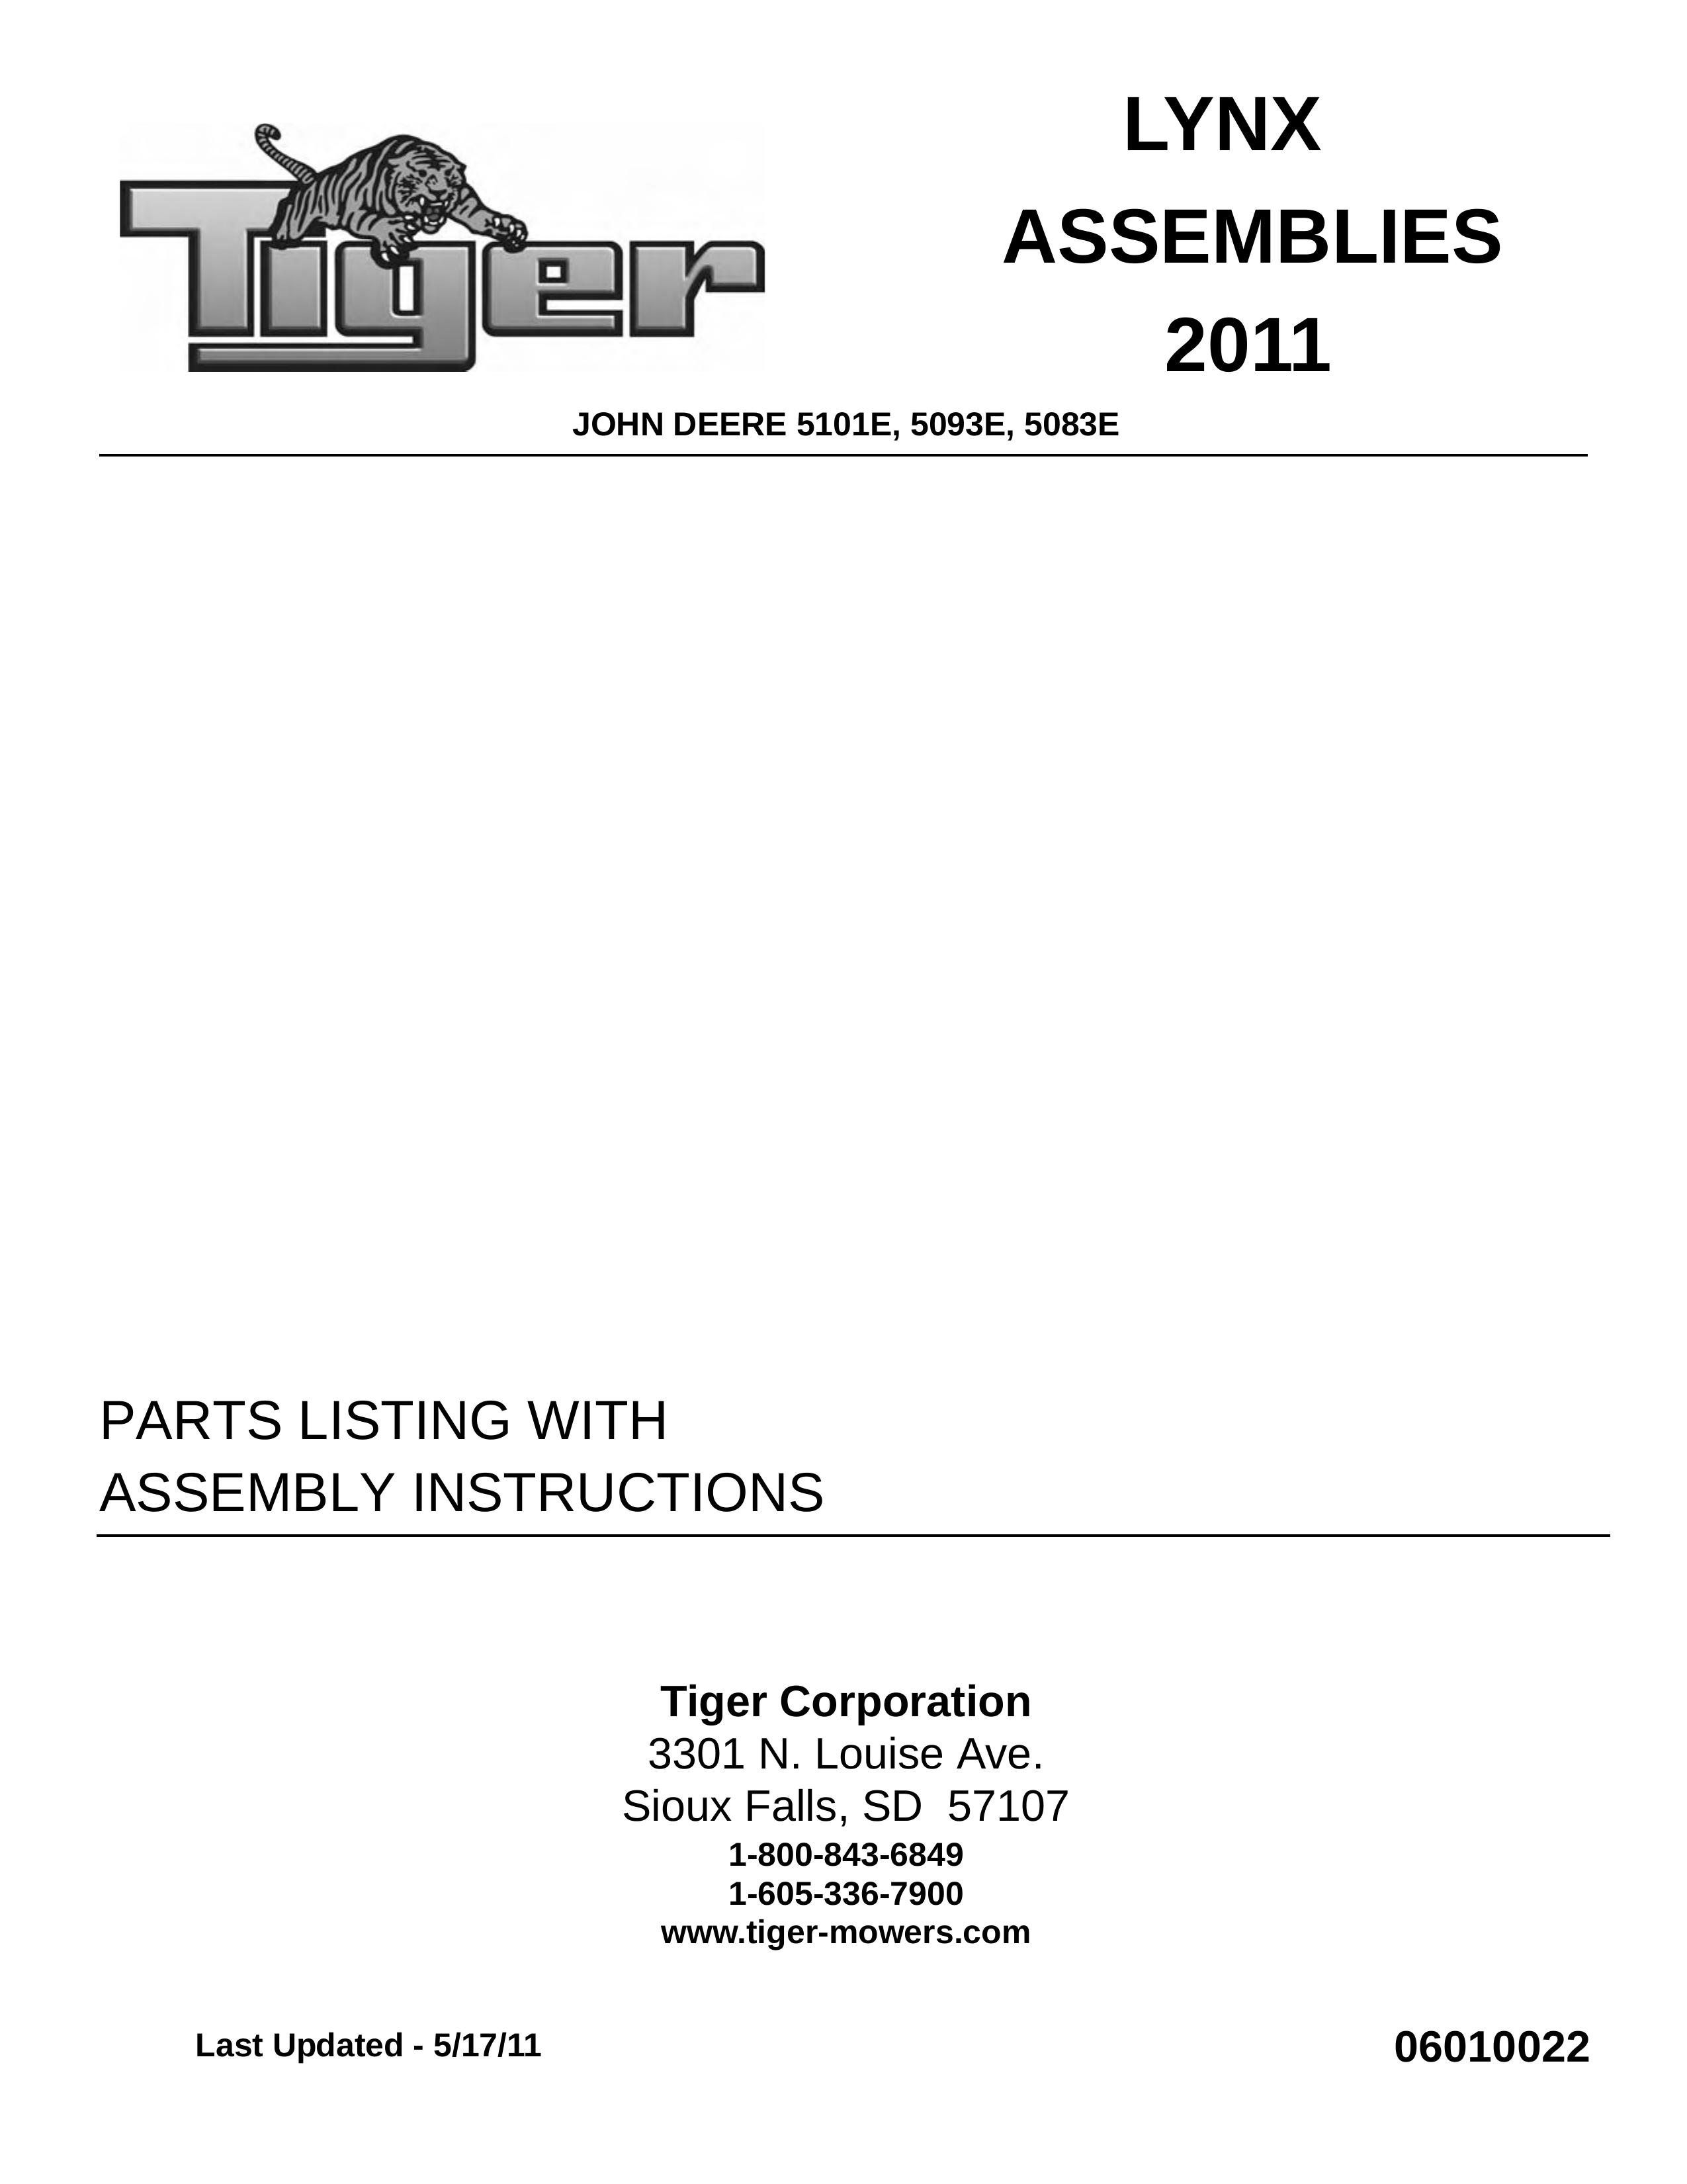 Tiger Products Co., Ltd 5083E Lawn Mower User Manual